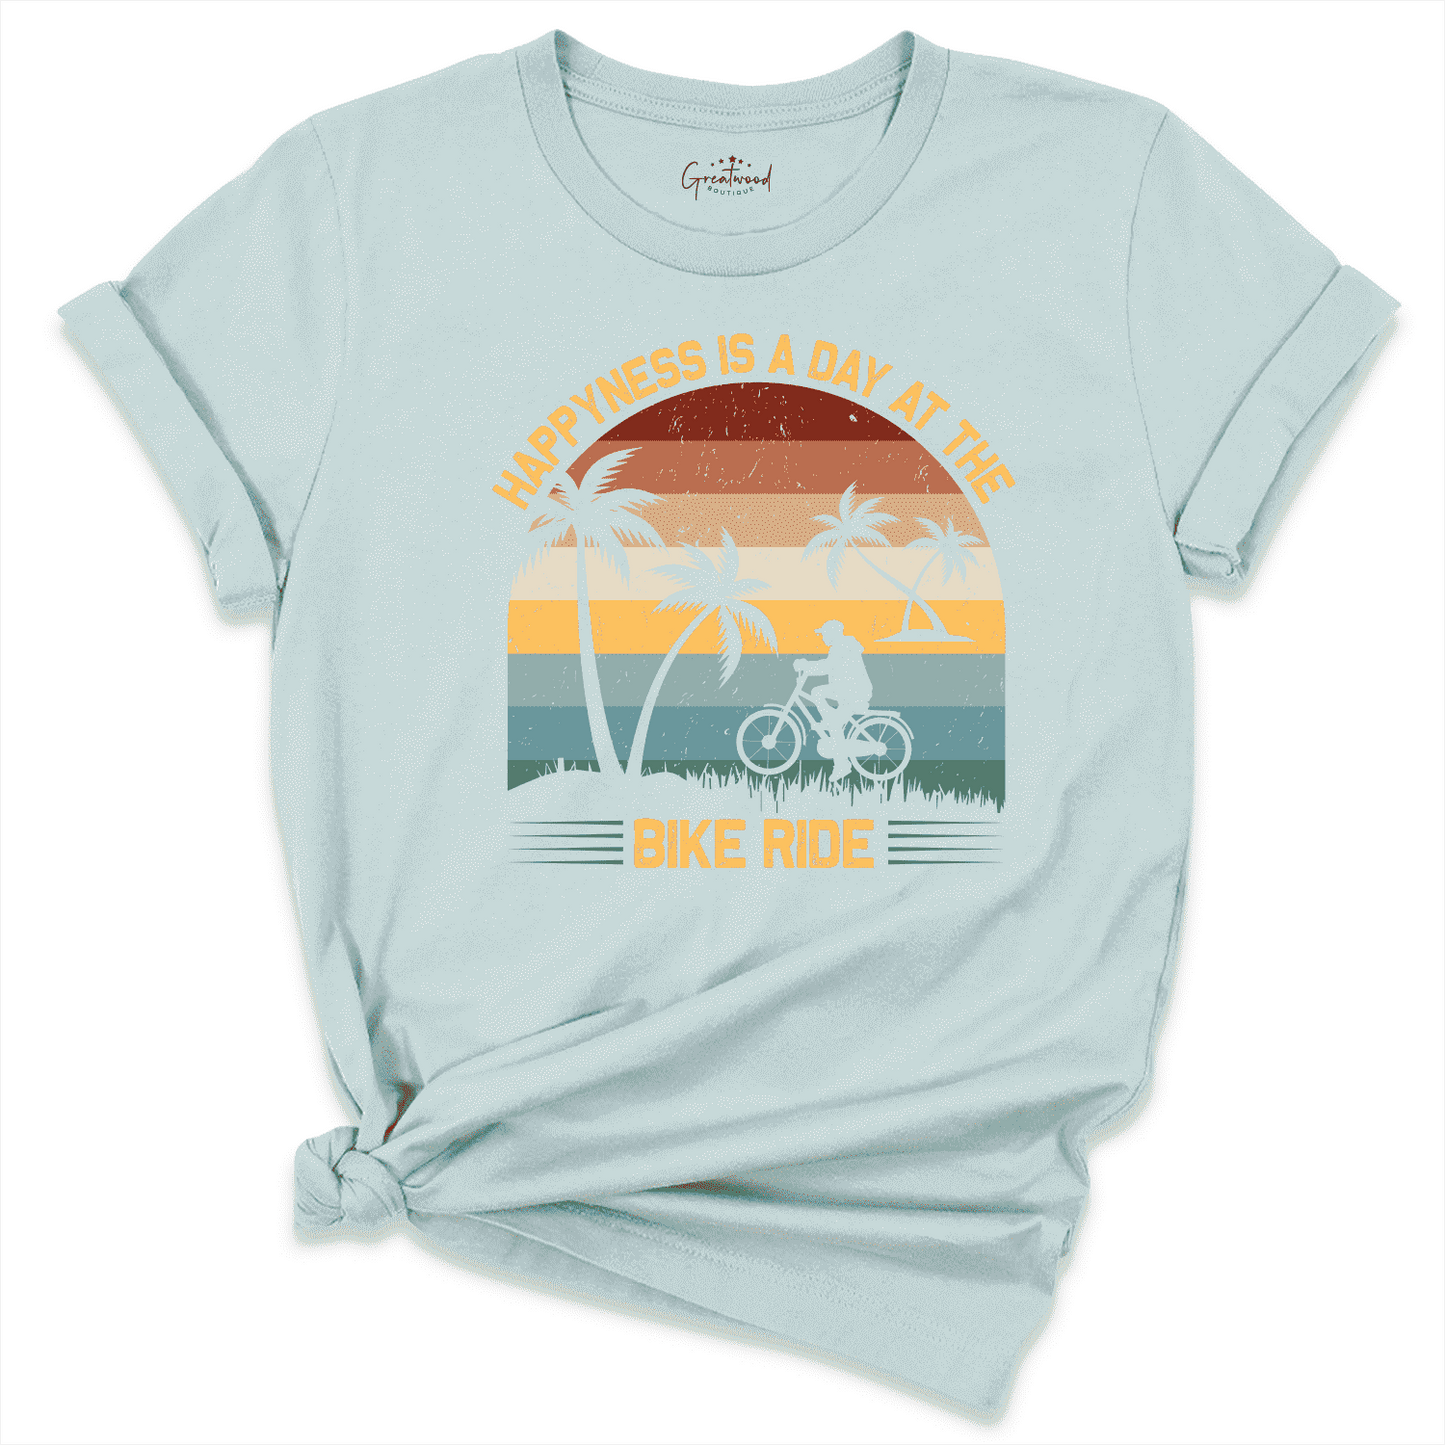 Happiness Is A Day At The Bike Ride Shirt Blue - Greatwood Boutique